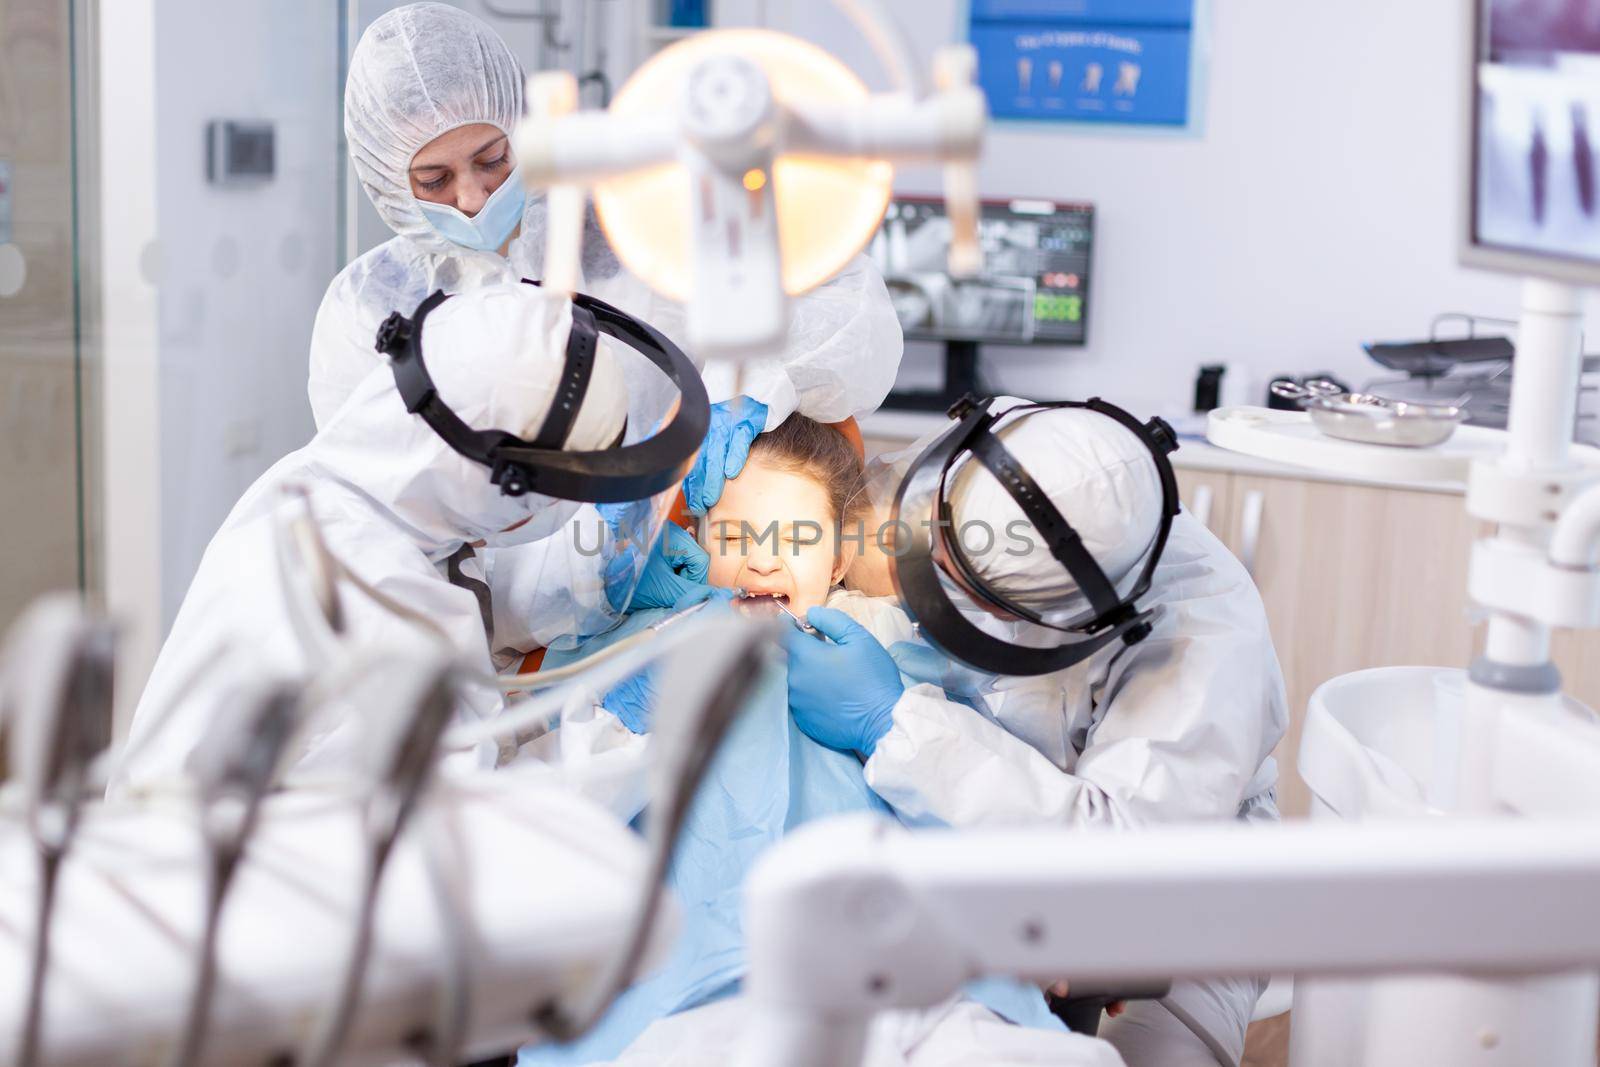 Little girl screaming in the course of painfull cavity treatment at dentist office dressed in protective suit. Stomatology team wearing ppe suit during covid19 doing procedure on child teeth.